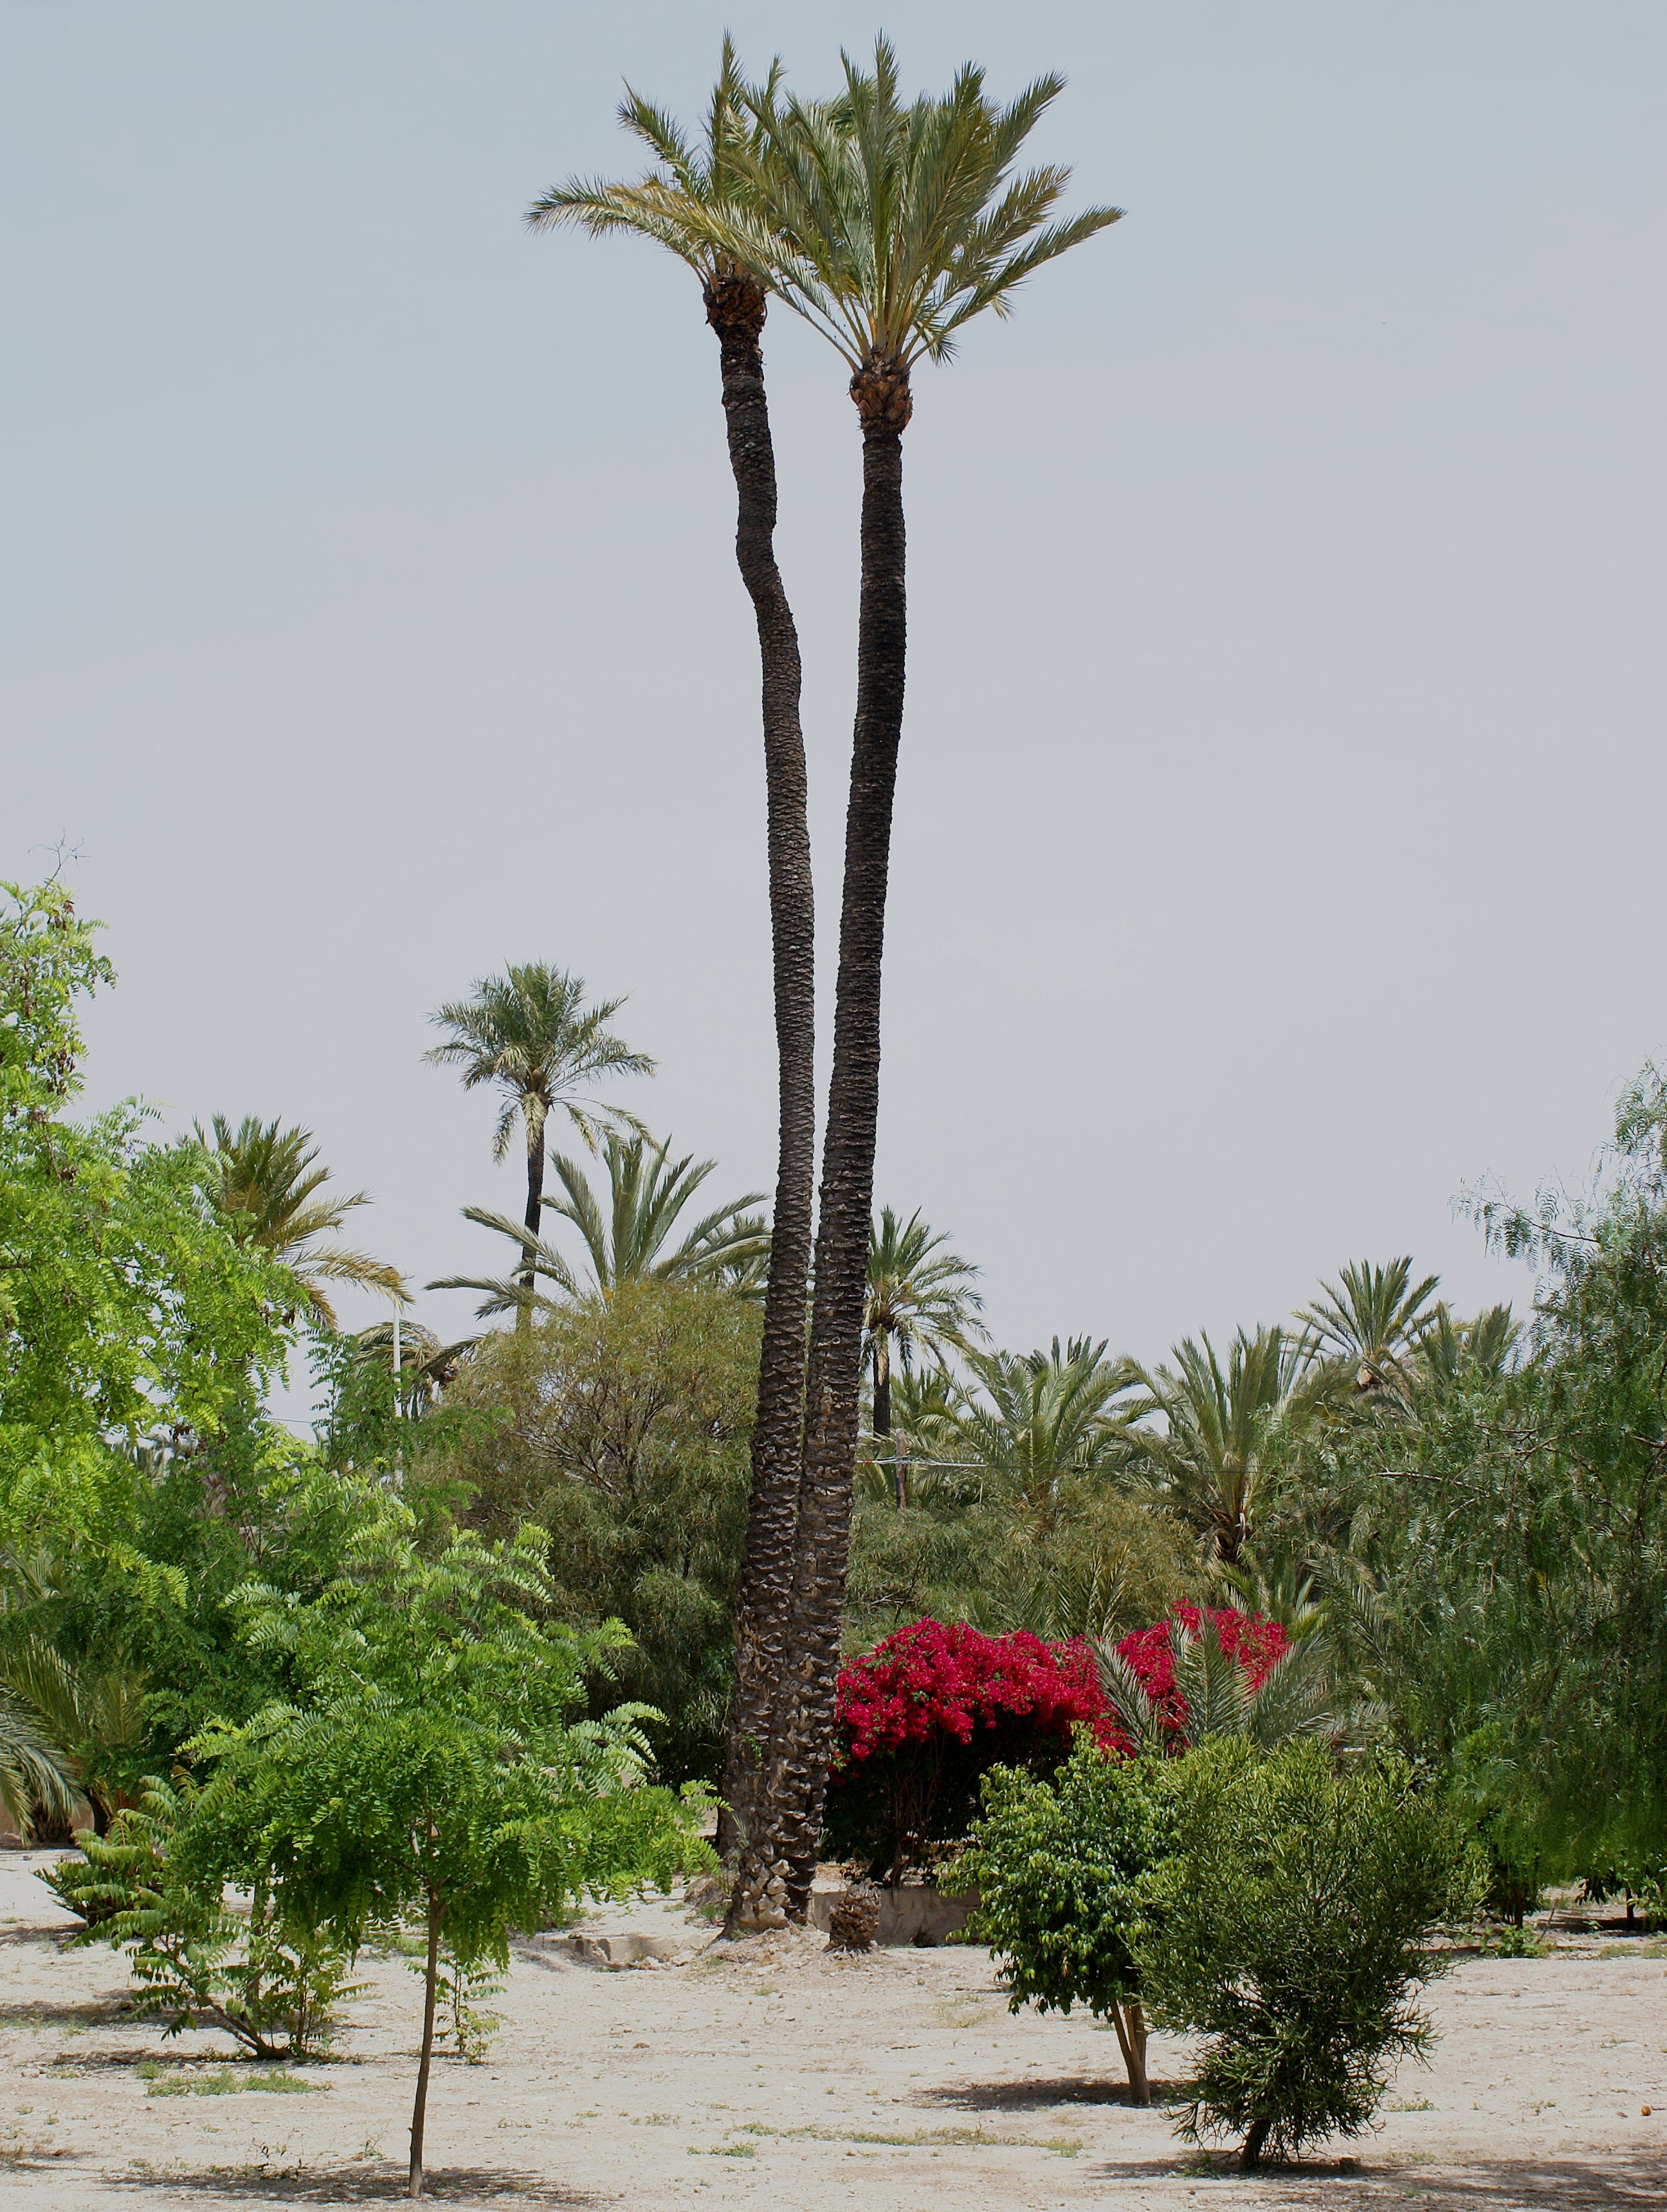 The Palm Grove of Elche